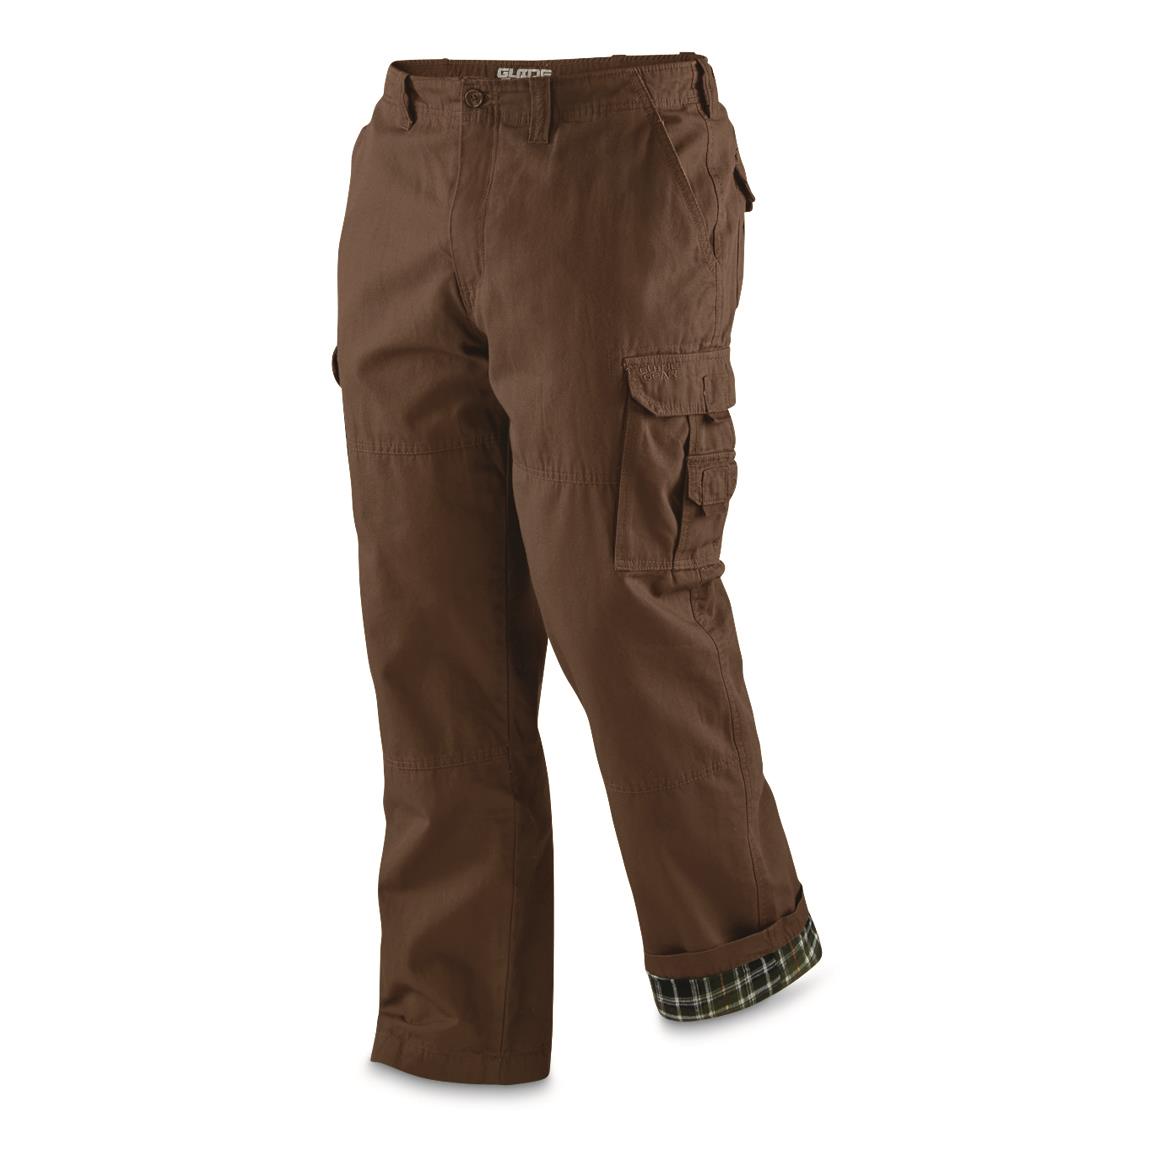 Guide Gear Men's Flannel Lined Cargo Pants - 700971, Insulated Pants ...